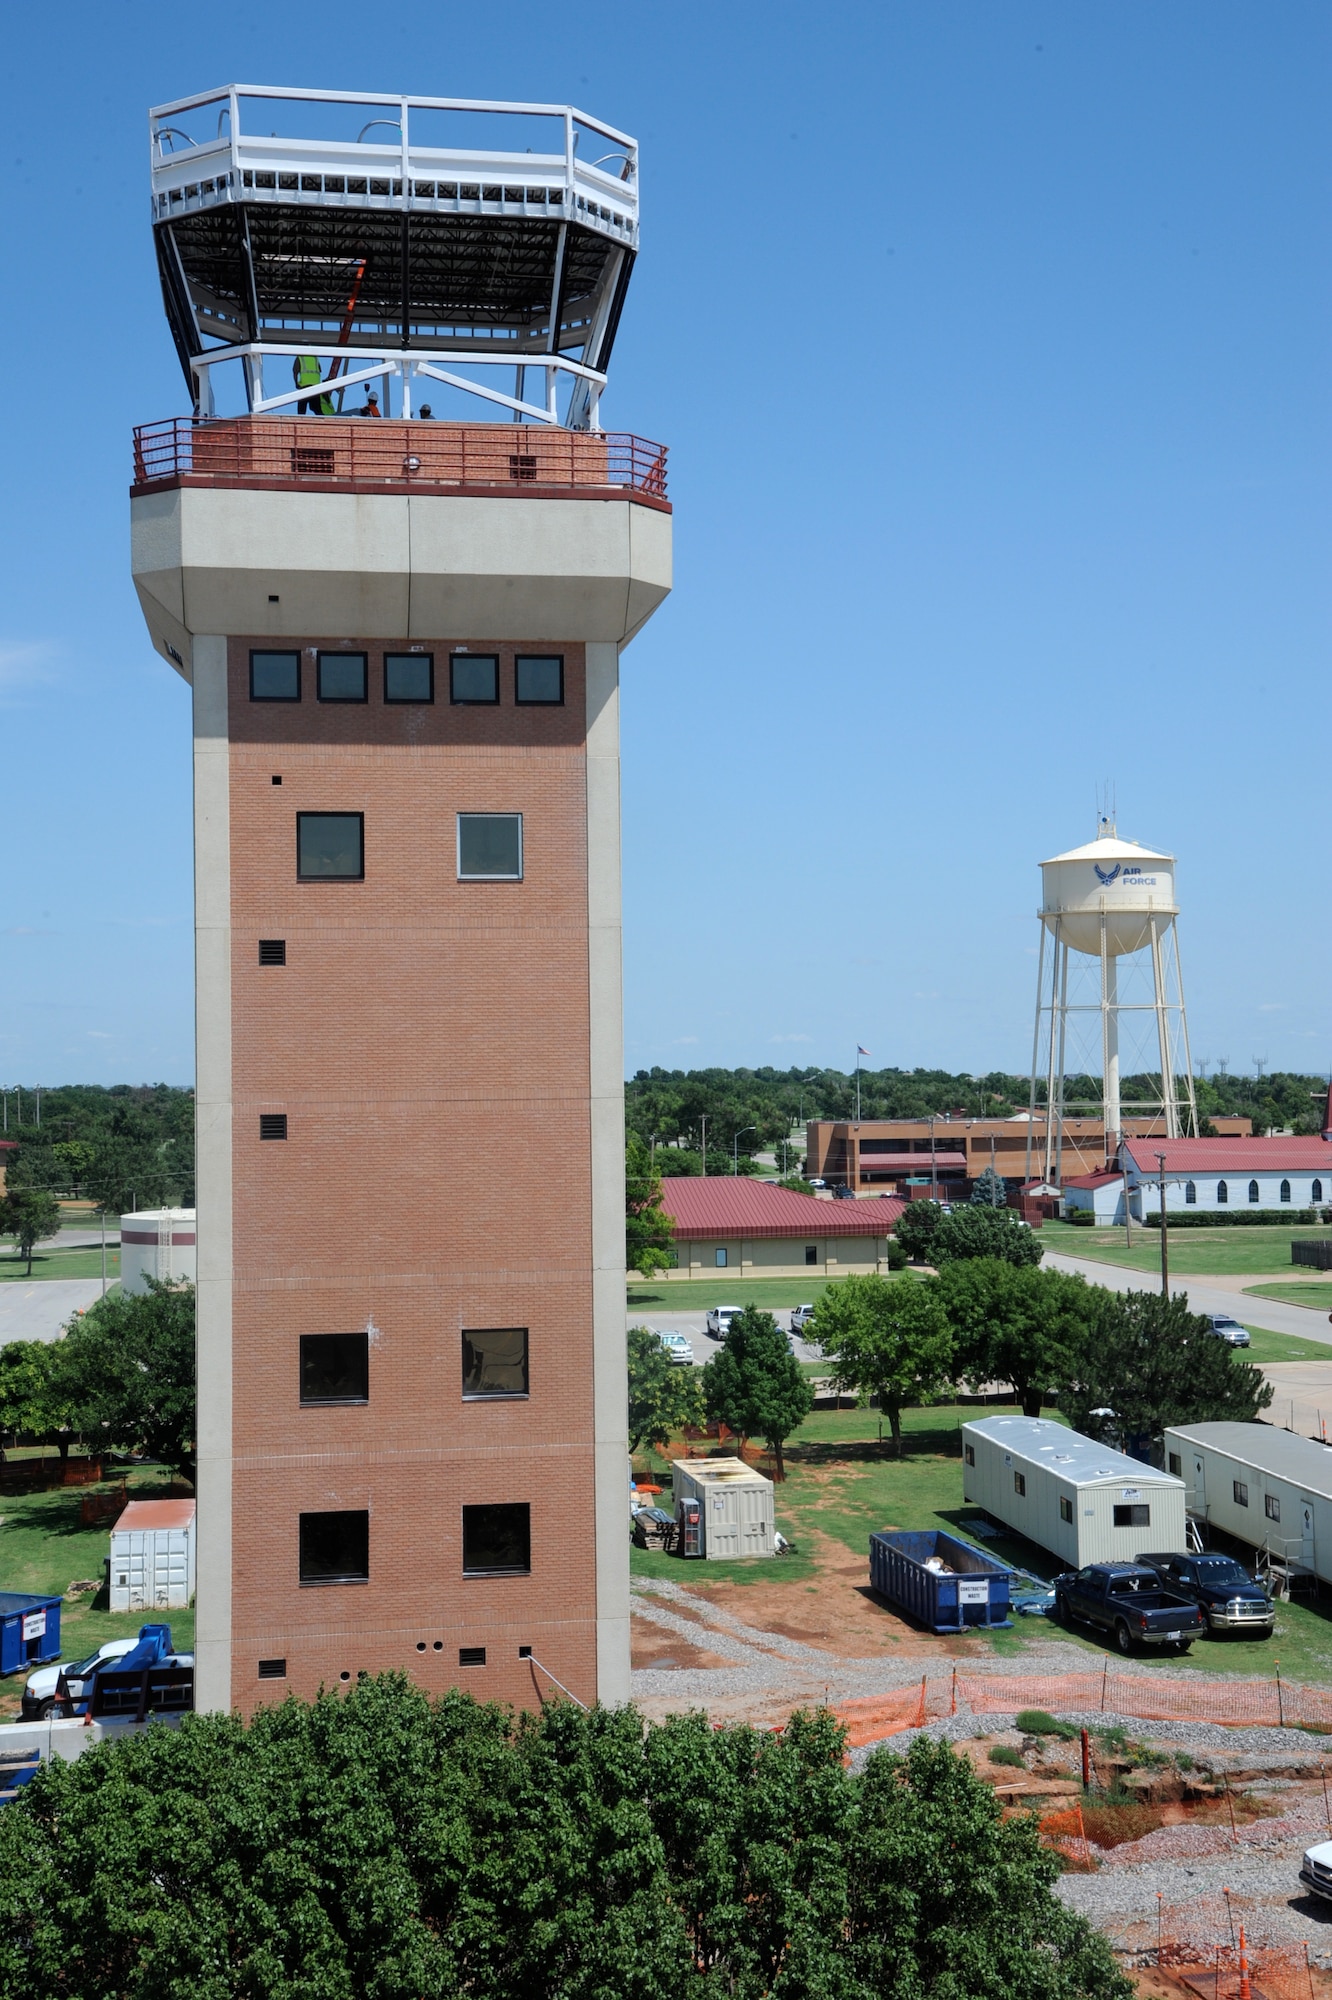 The completion date for the new control tower at Vance Air Force Base, Okla., initially scheduled for this summer, has been delayed until approximately February 2014. (U.S. Air Force photo/ Senior Airman Frank Casciotta)